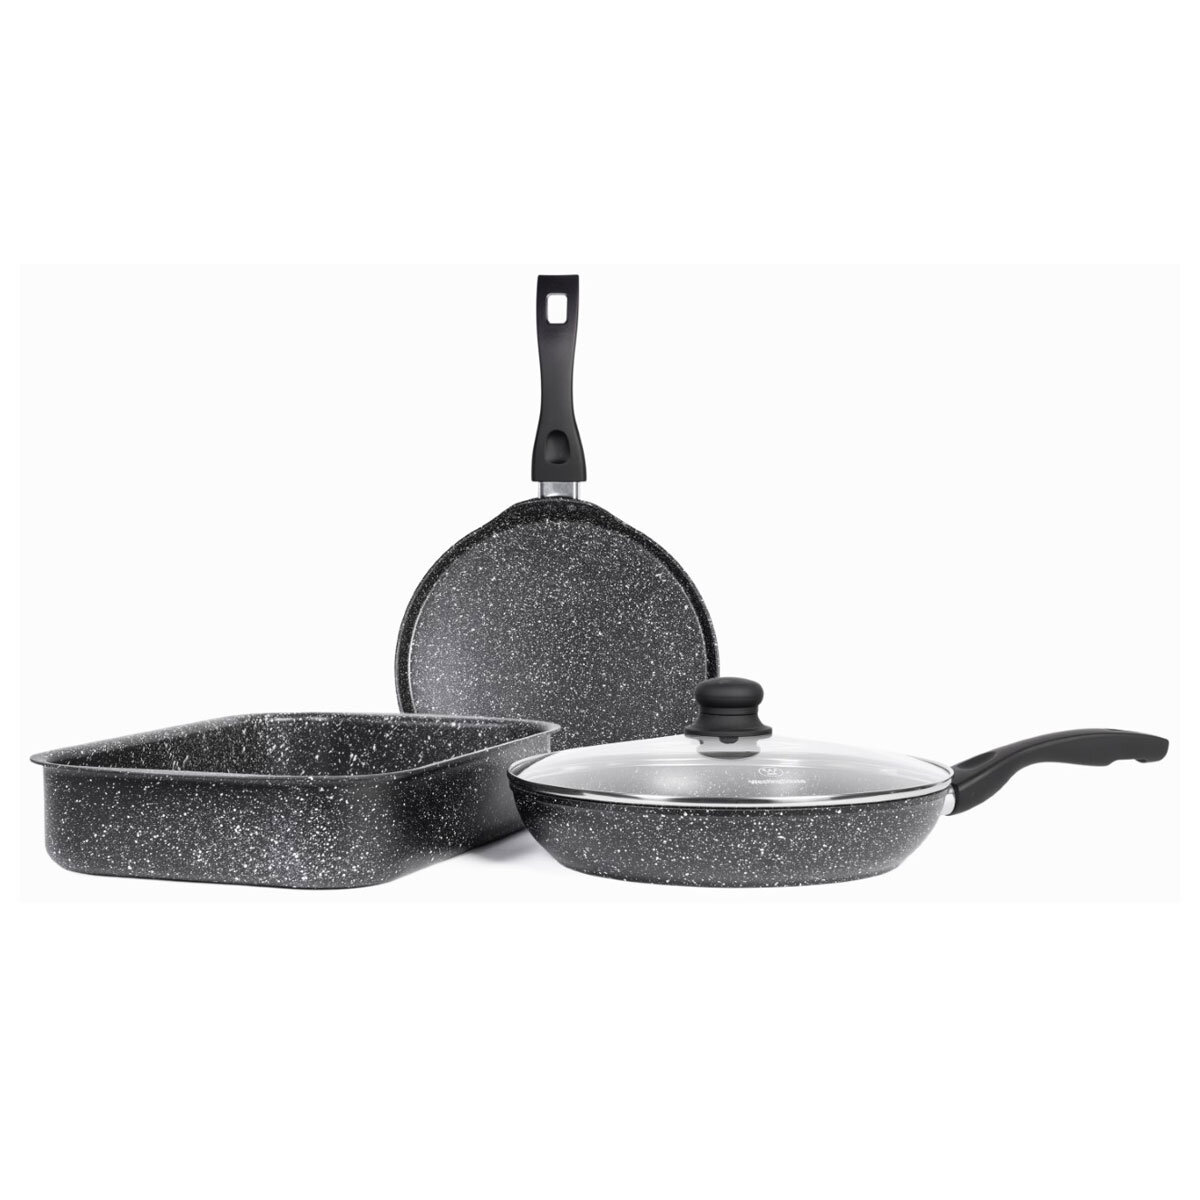 Westinghouse Multi-Cookware for Microwave Pans, 3-Piece Set